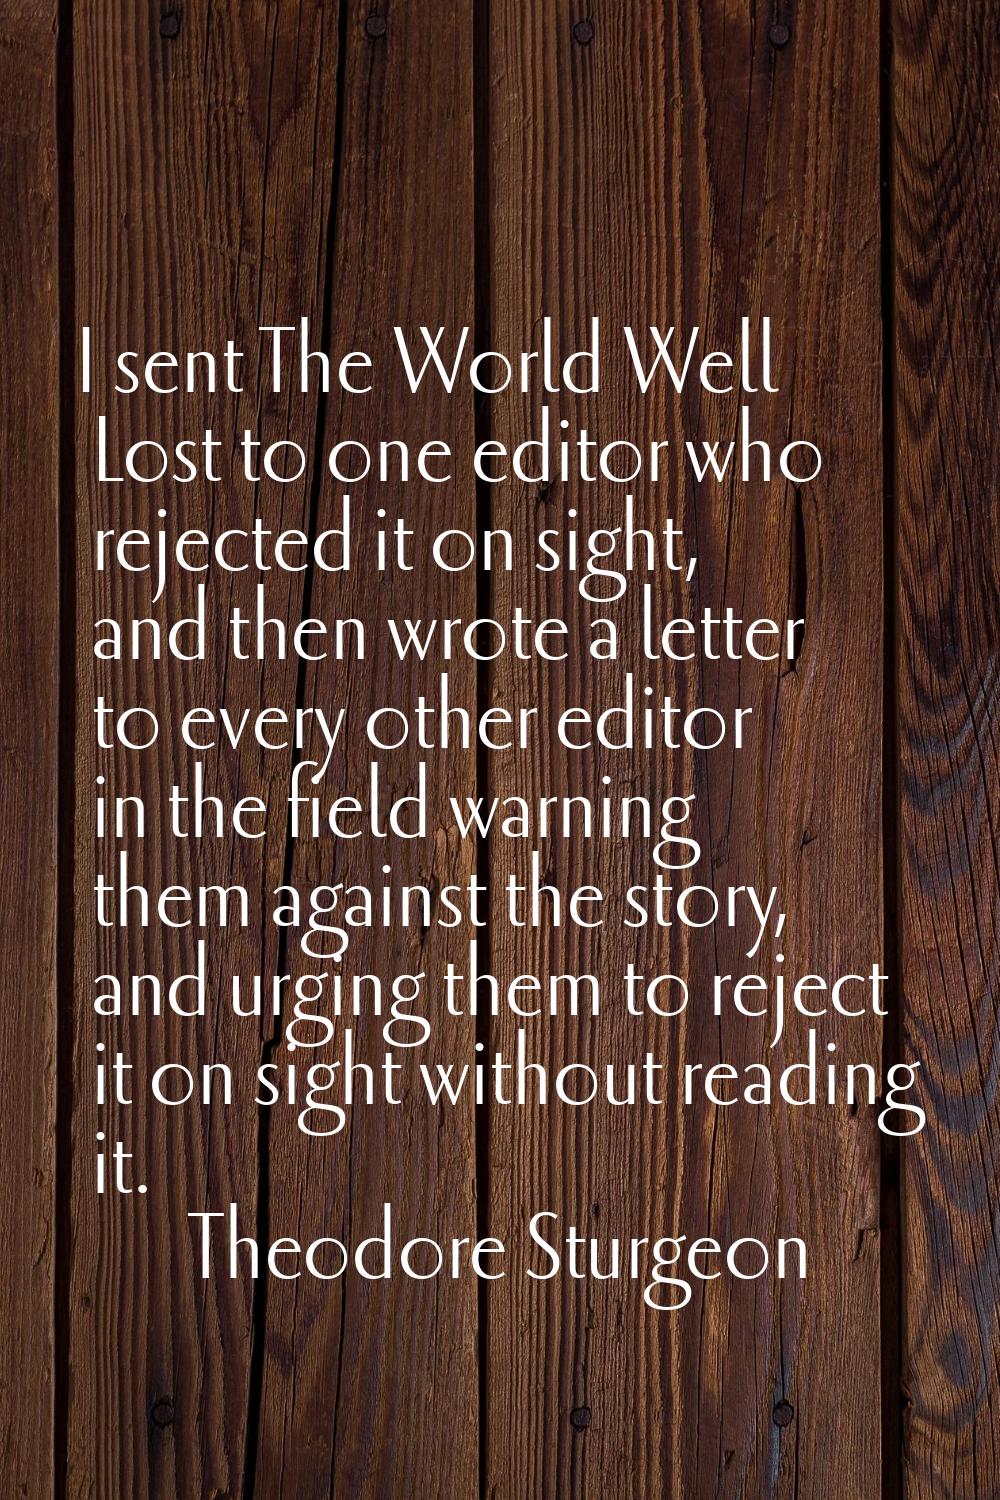 I sent The World Well Lost to one editor who rejected it on sight, and then wrote a letter to every